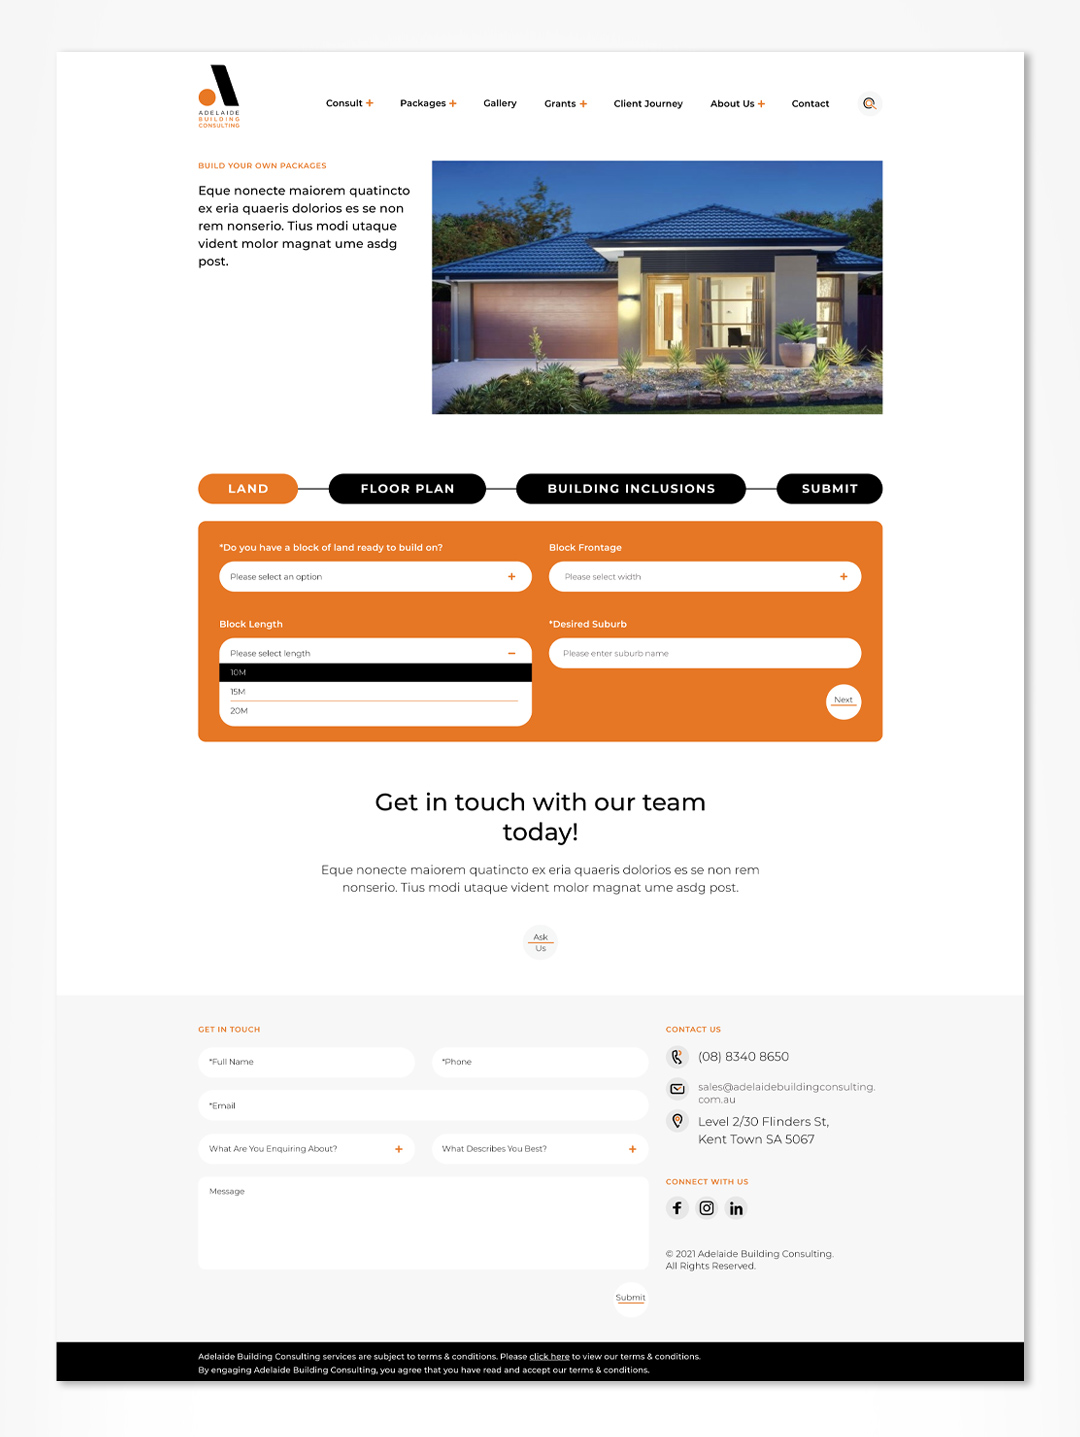 ADELAIDE BUILDING CONSULTING website redesign, website wireframe and high fidelity prototype.